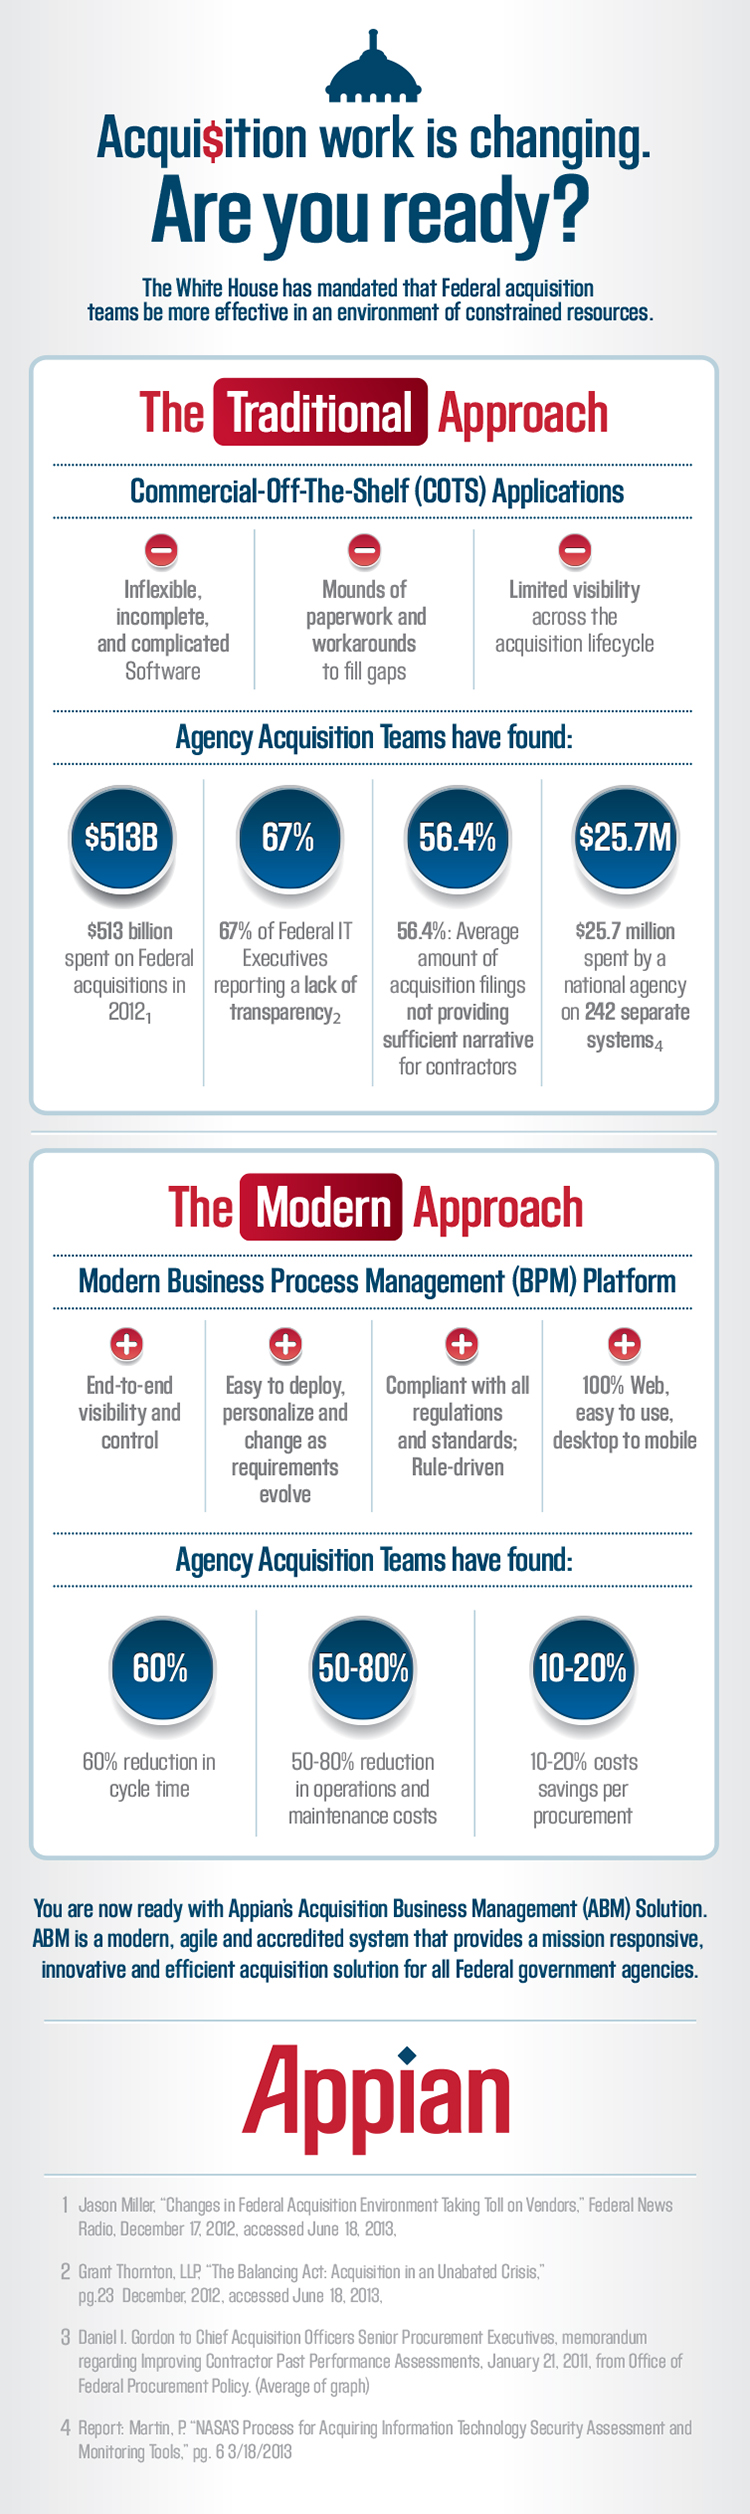 Acquisition Work Is Changing - Are You Ready?